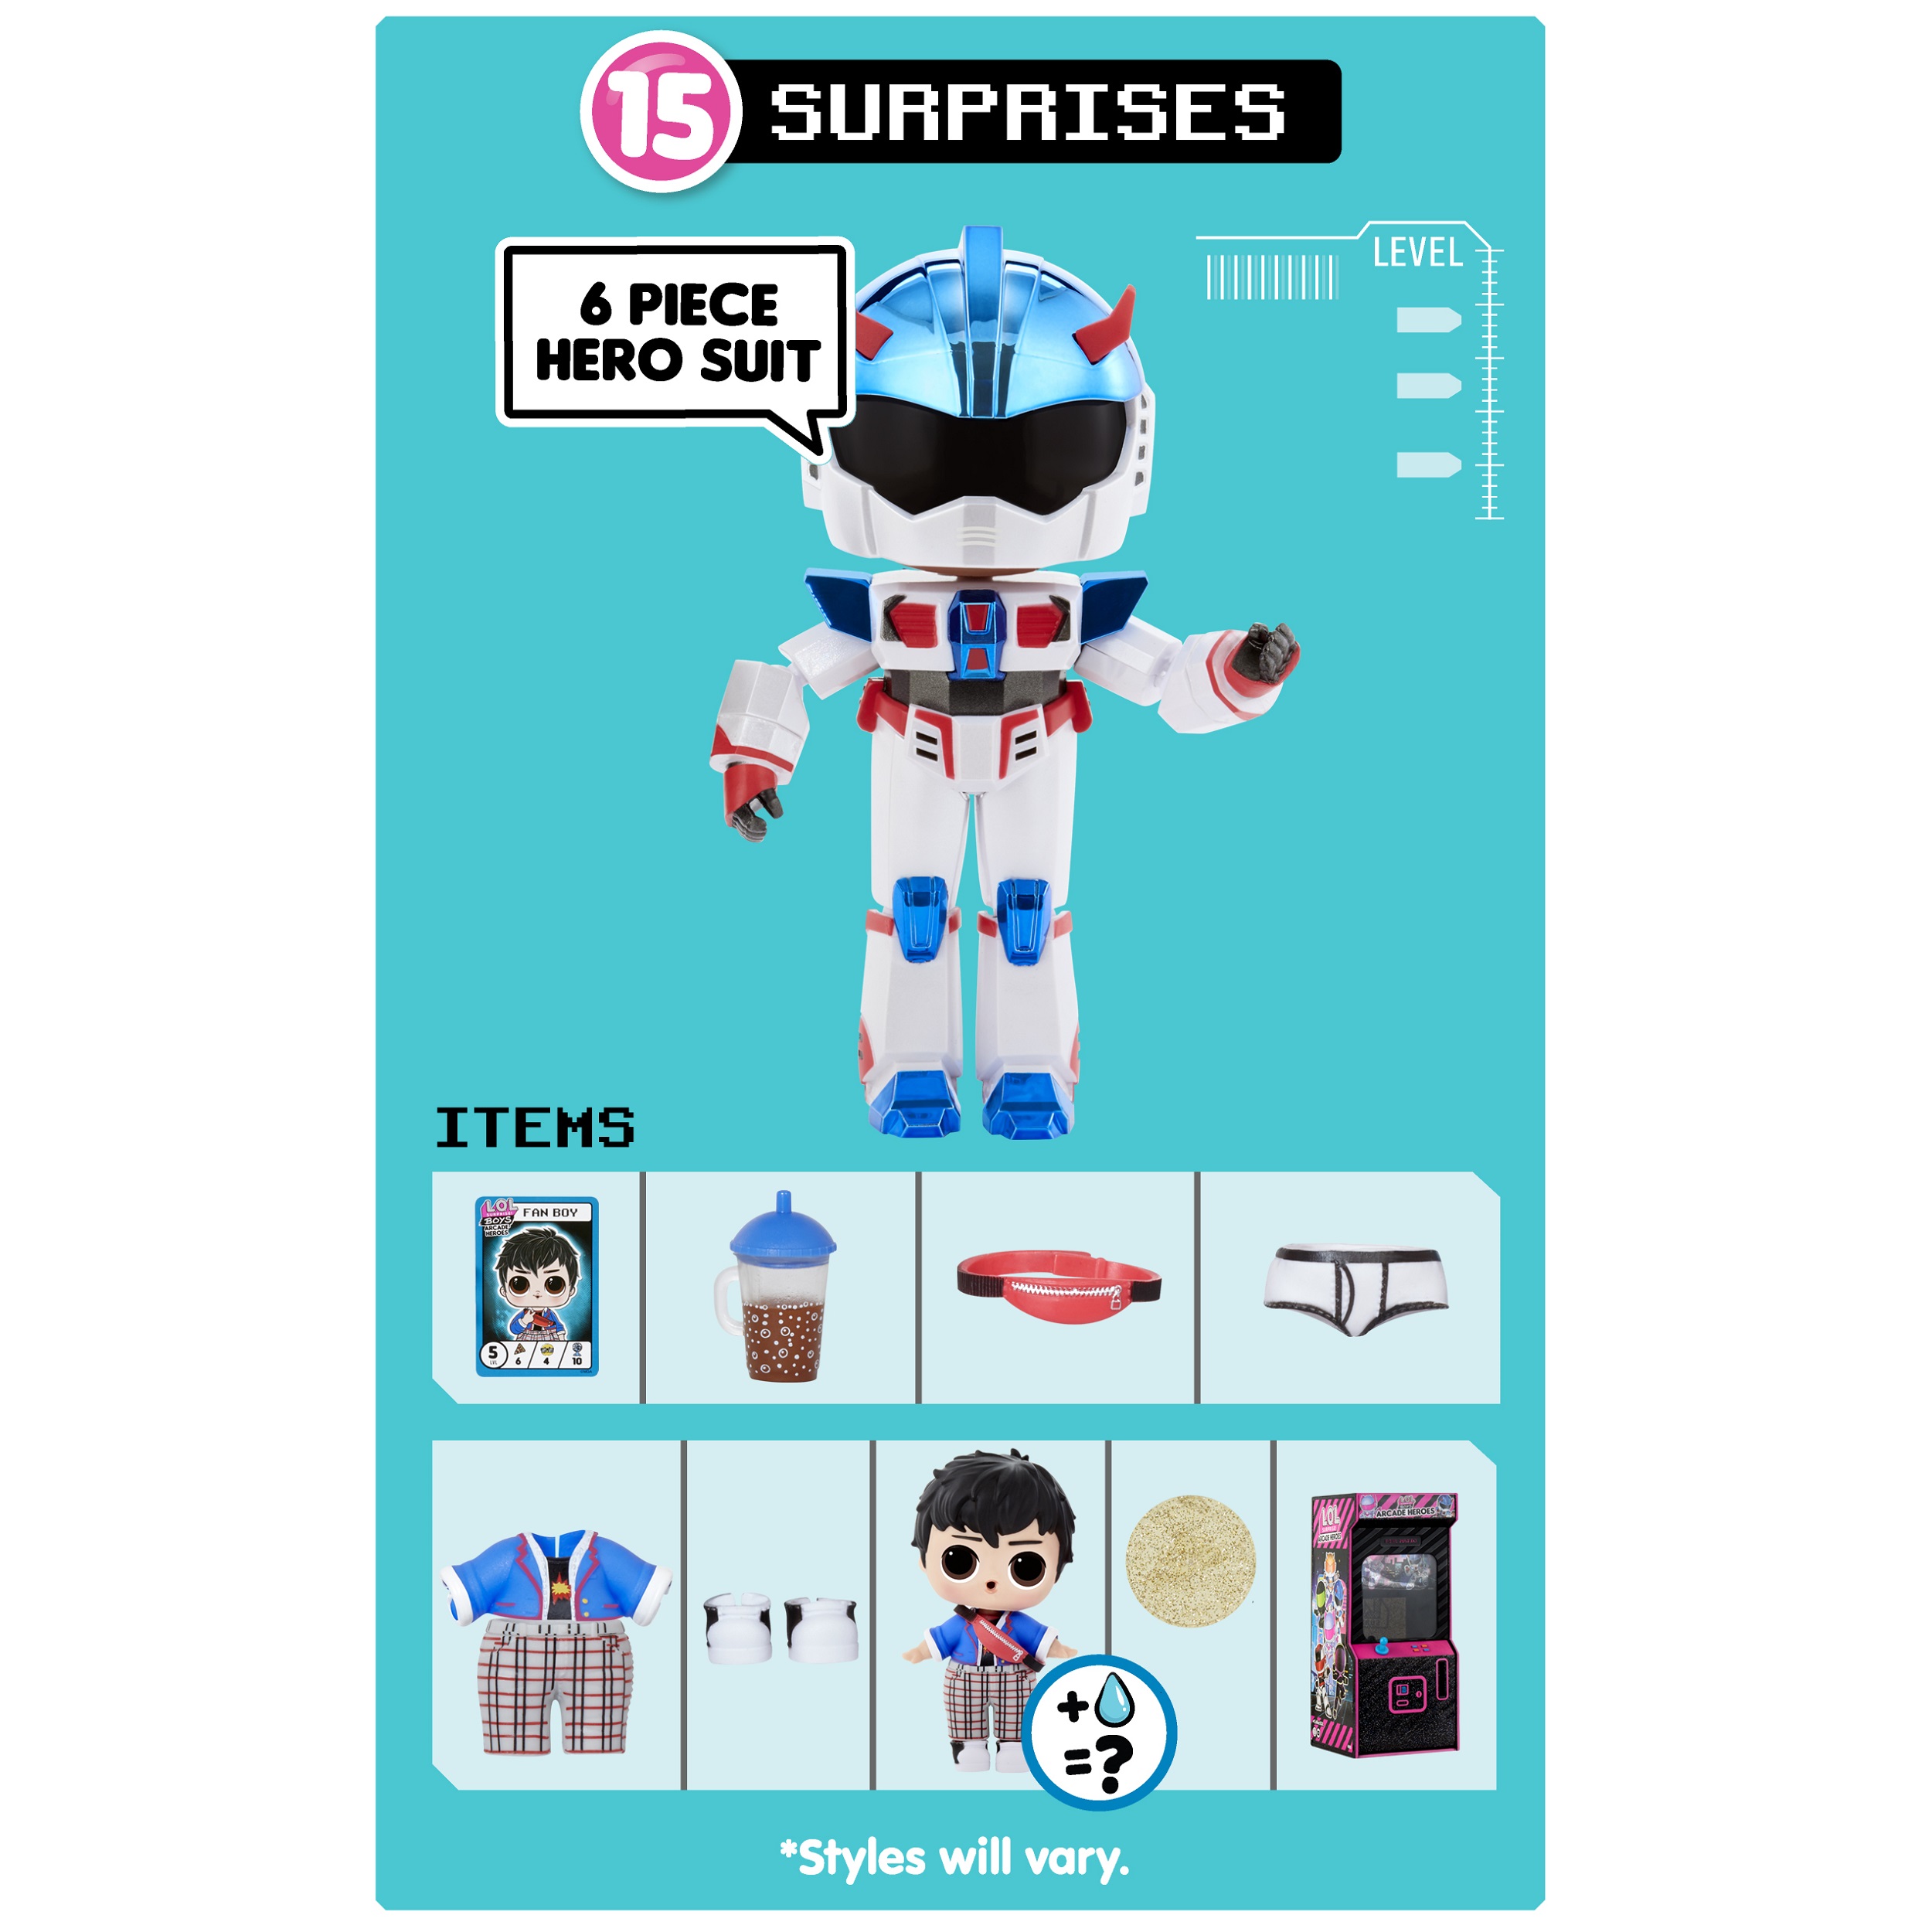 LOL Surprise Boys Arcade Heroes – Action Figure Doll With 15 Surprises, Great Gift for Kids Ages 4 5 6+ - image 4 of 7